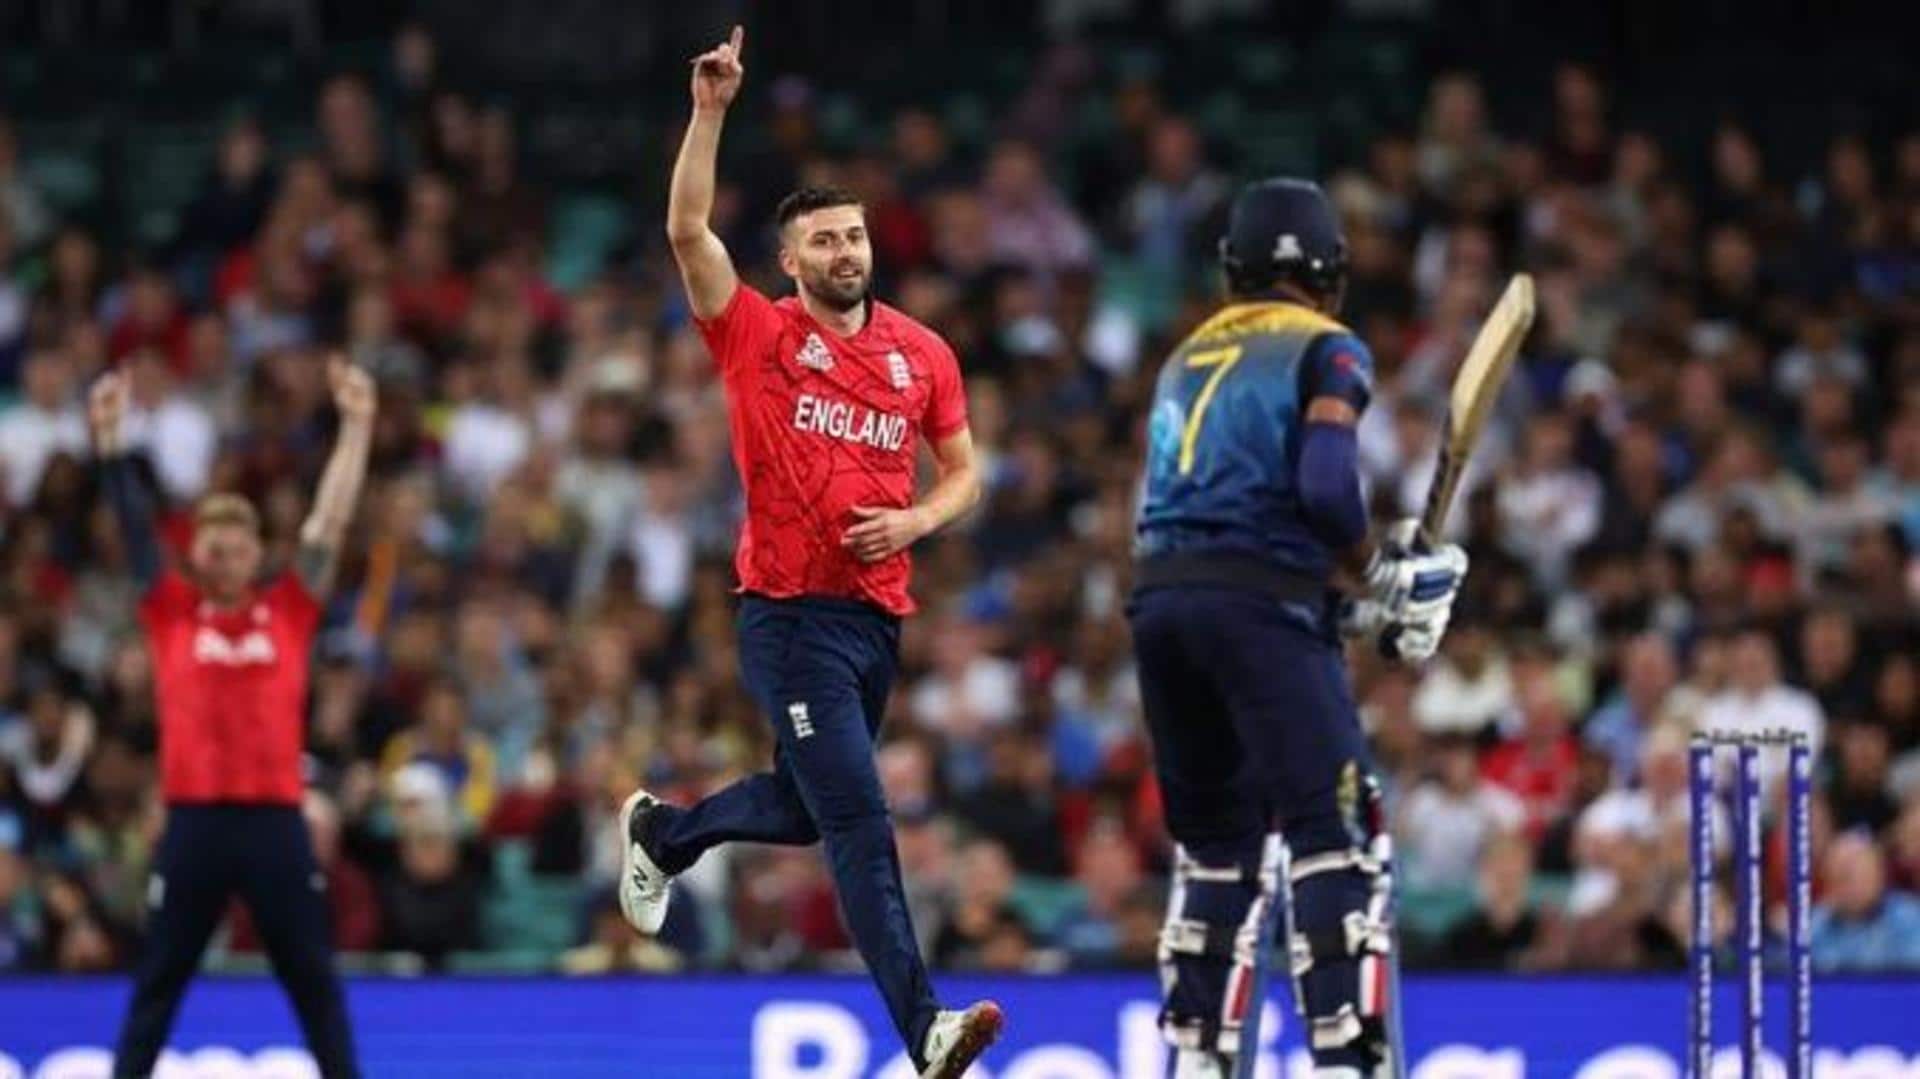 2022 T20 WC: England's sensational bowling numbers in death overs